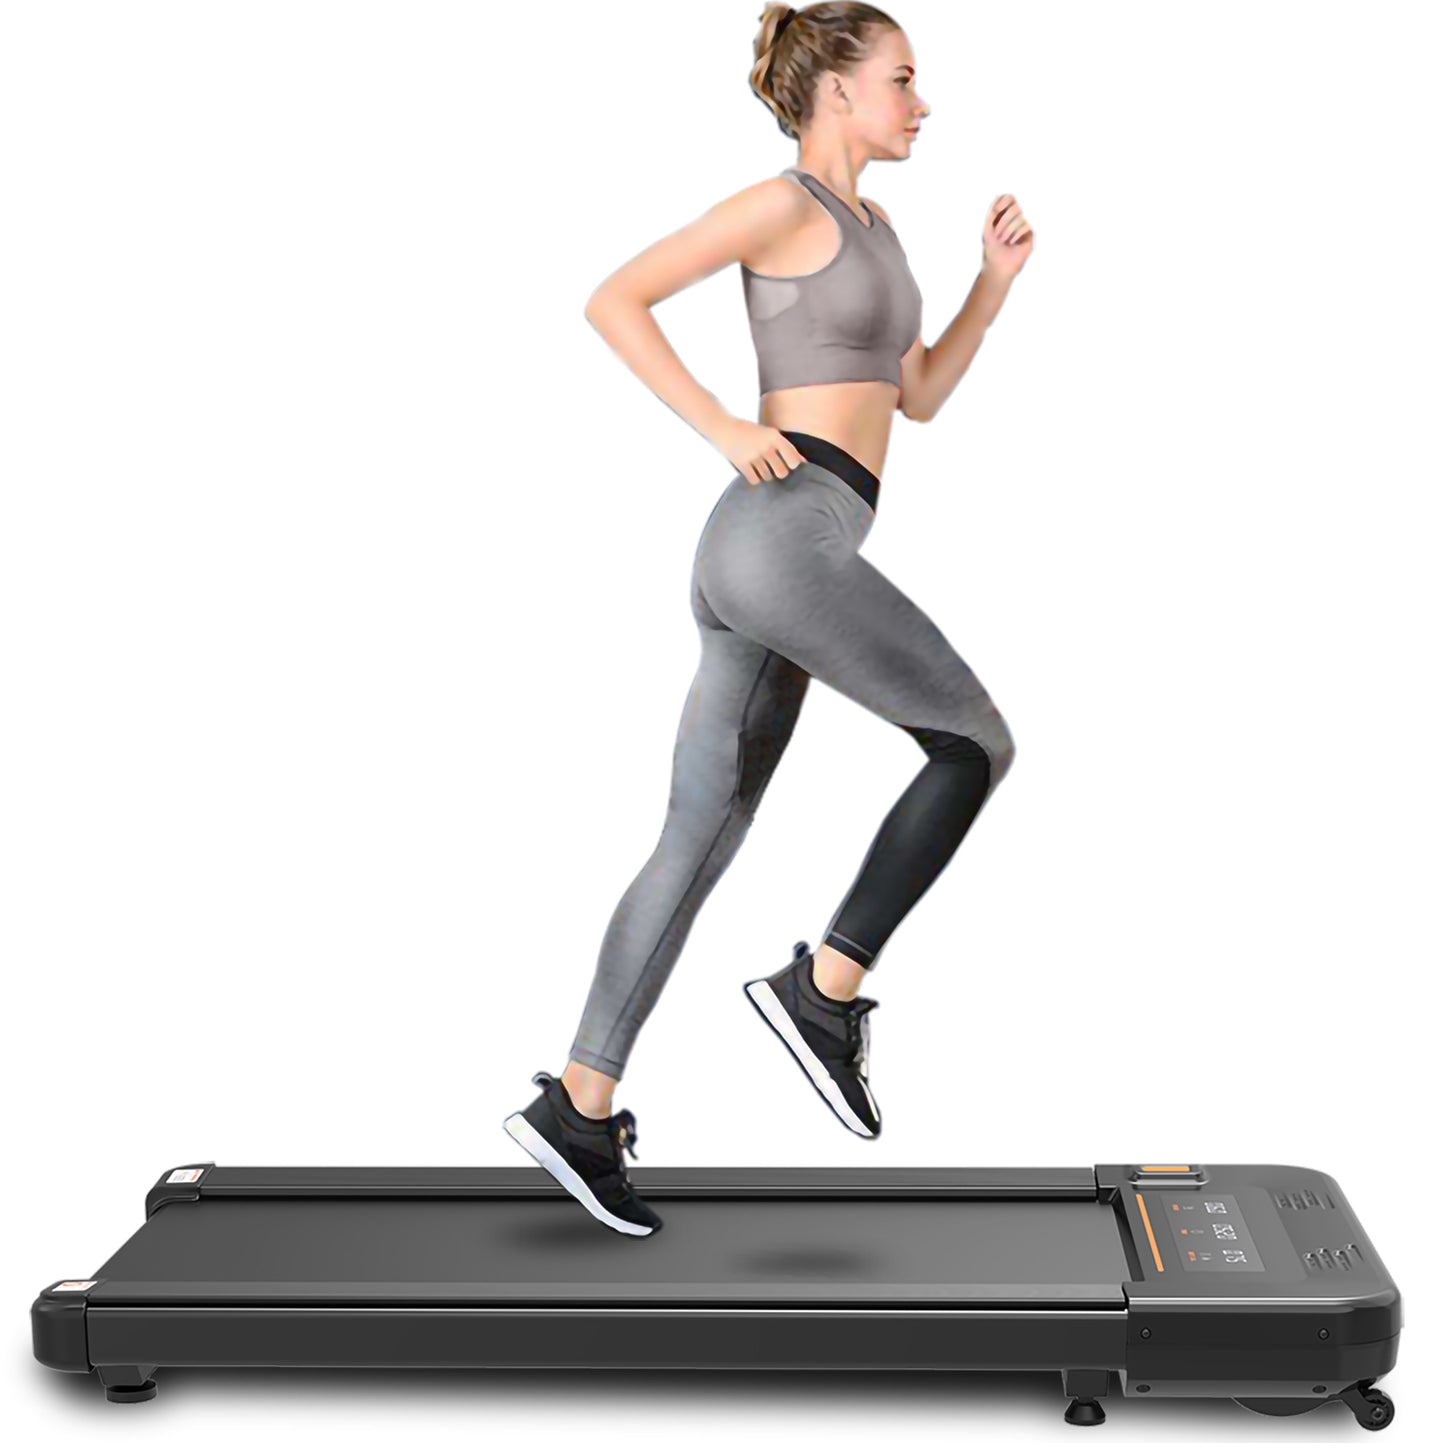 cardio workout, fitness, wellness, exercise, foldable treadmills can be a great way to improve your immunity. Raee-Industries.